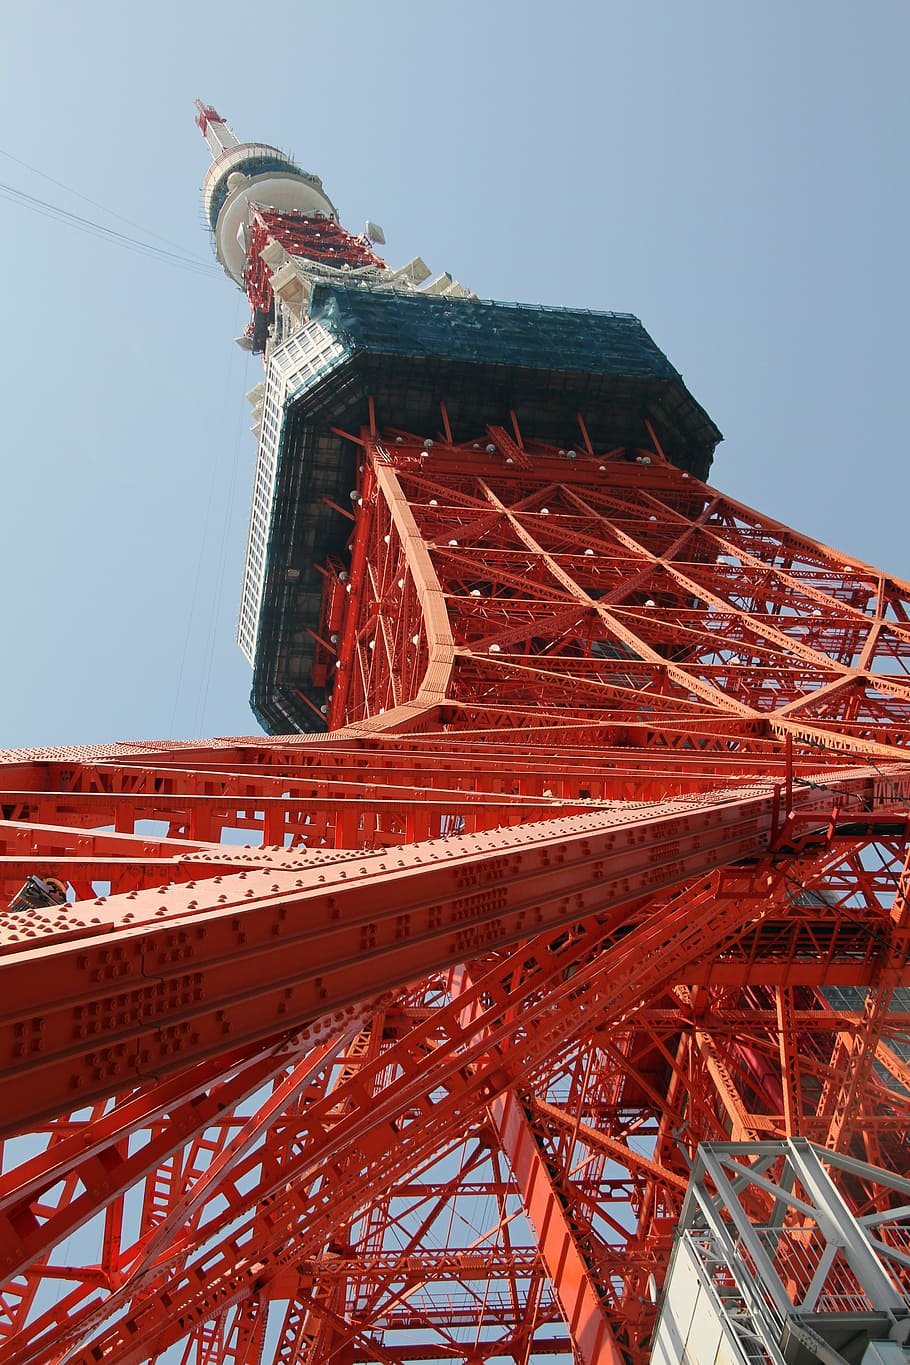 tokyo tower, landmark, japan, architecture, attraction, famous, tourist, built structure, low angle view, sky